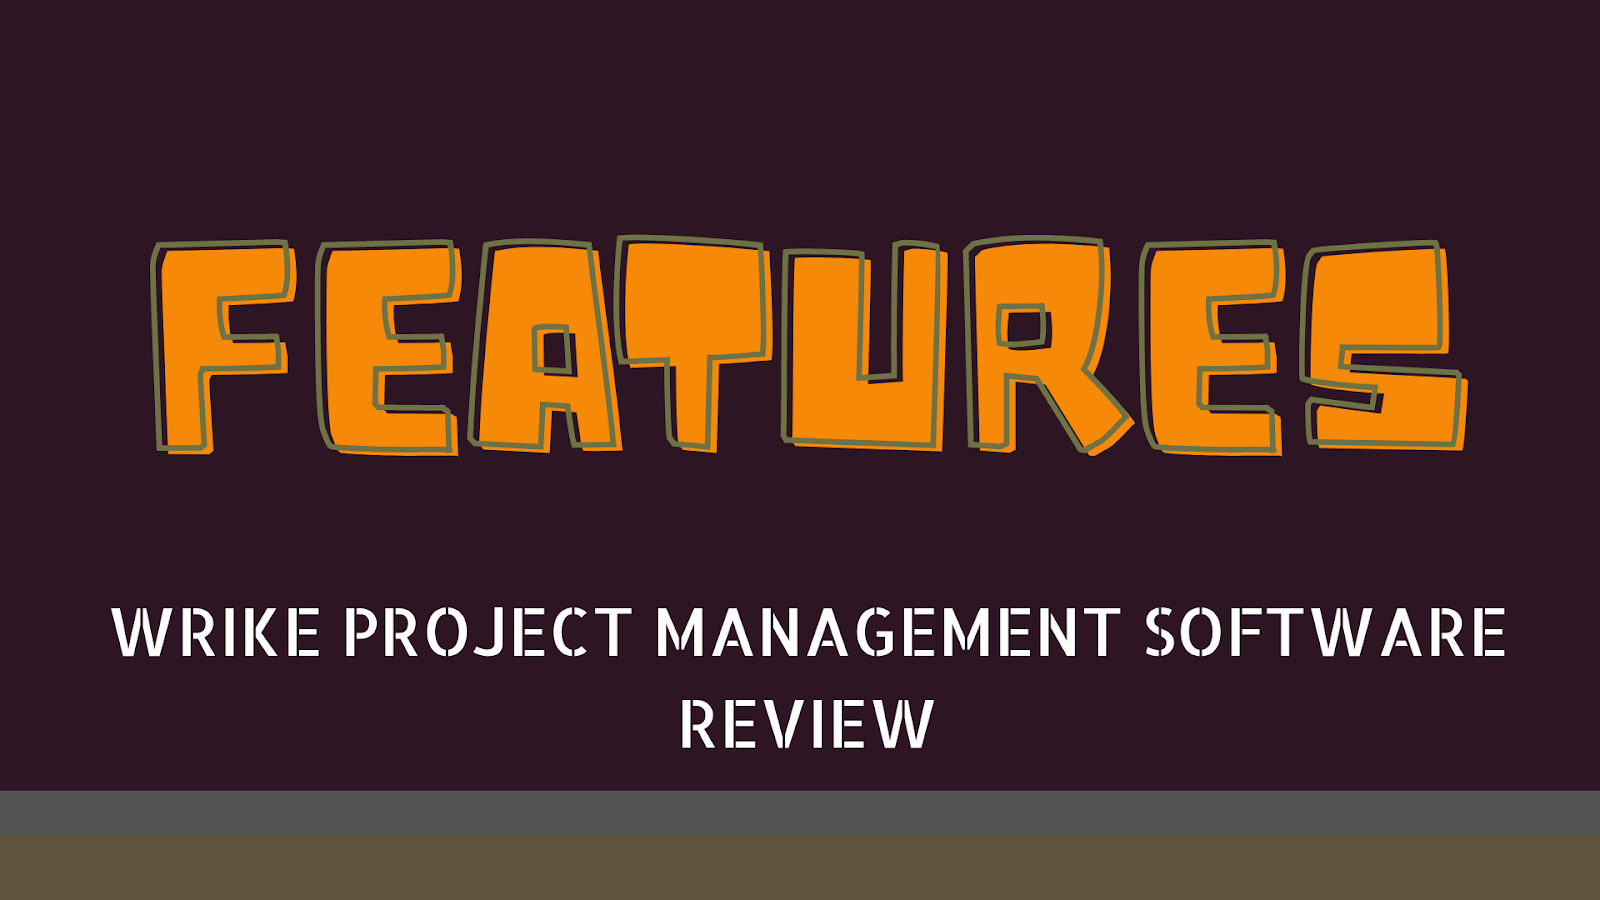 Wrike Project Management Software Features